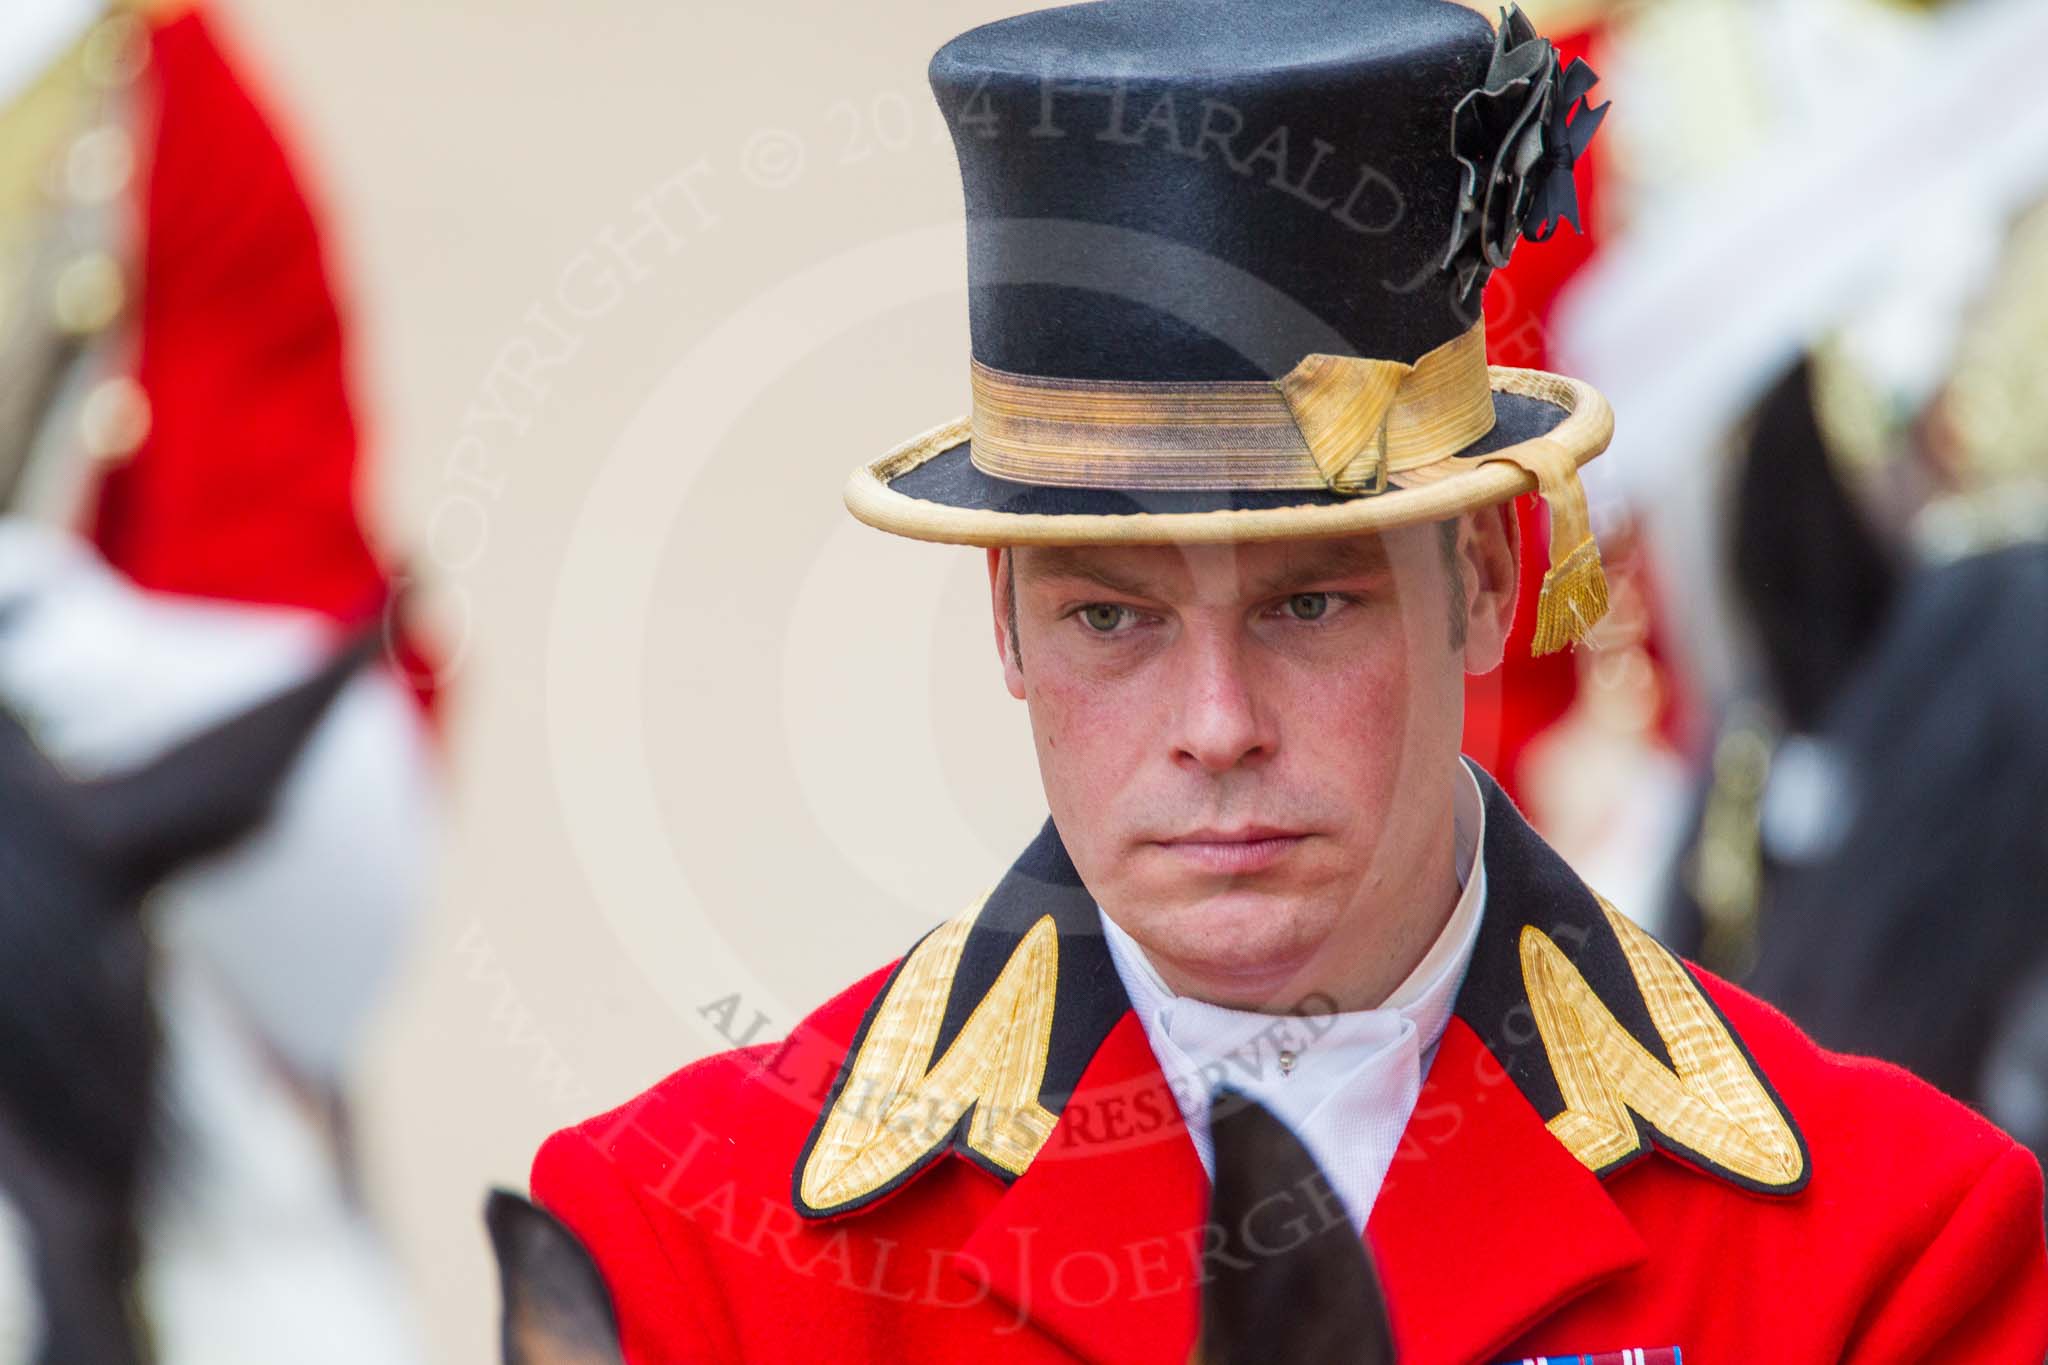 Trooping the Colour 2014.
Horse Guards Parade, Westminster,
London SW1A,

United Kingdom,
on 14 June 2014 at 11:03, image #406